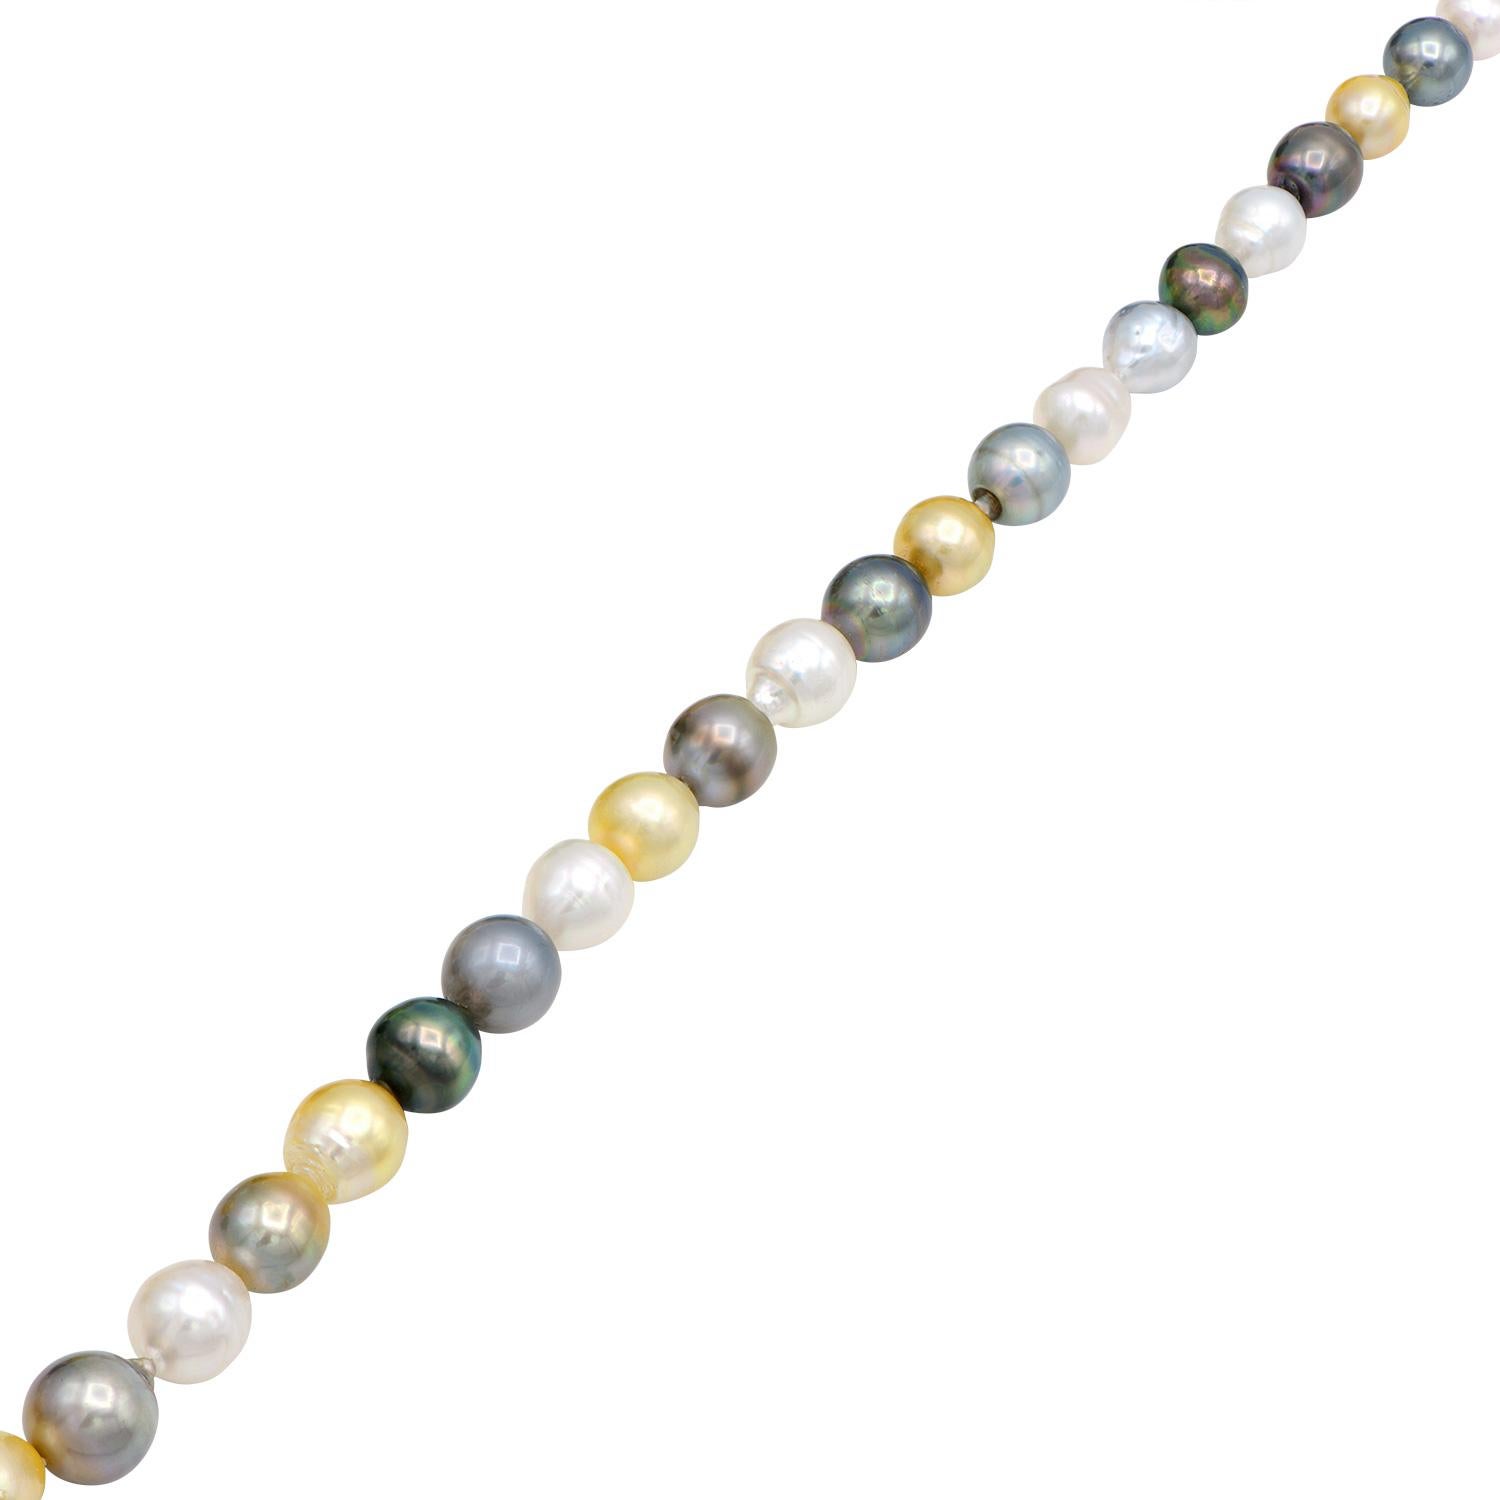 This beautiful unique pearl strand is made from baroque South Sea and Tahitian pearls in shades of black, gold, and white. The pearls range in size from 10.8-14.6mm. The strand is strung with a double knot between every pearl and closed with a 14